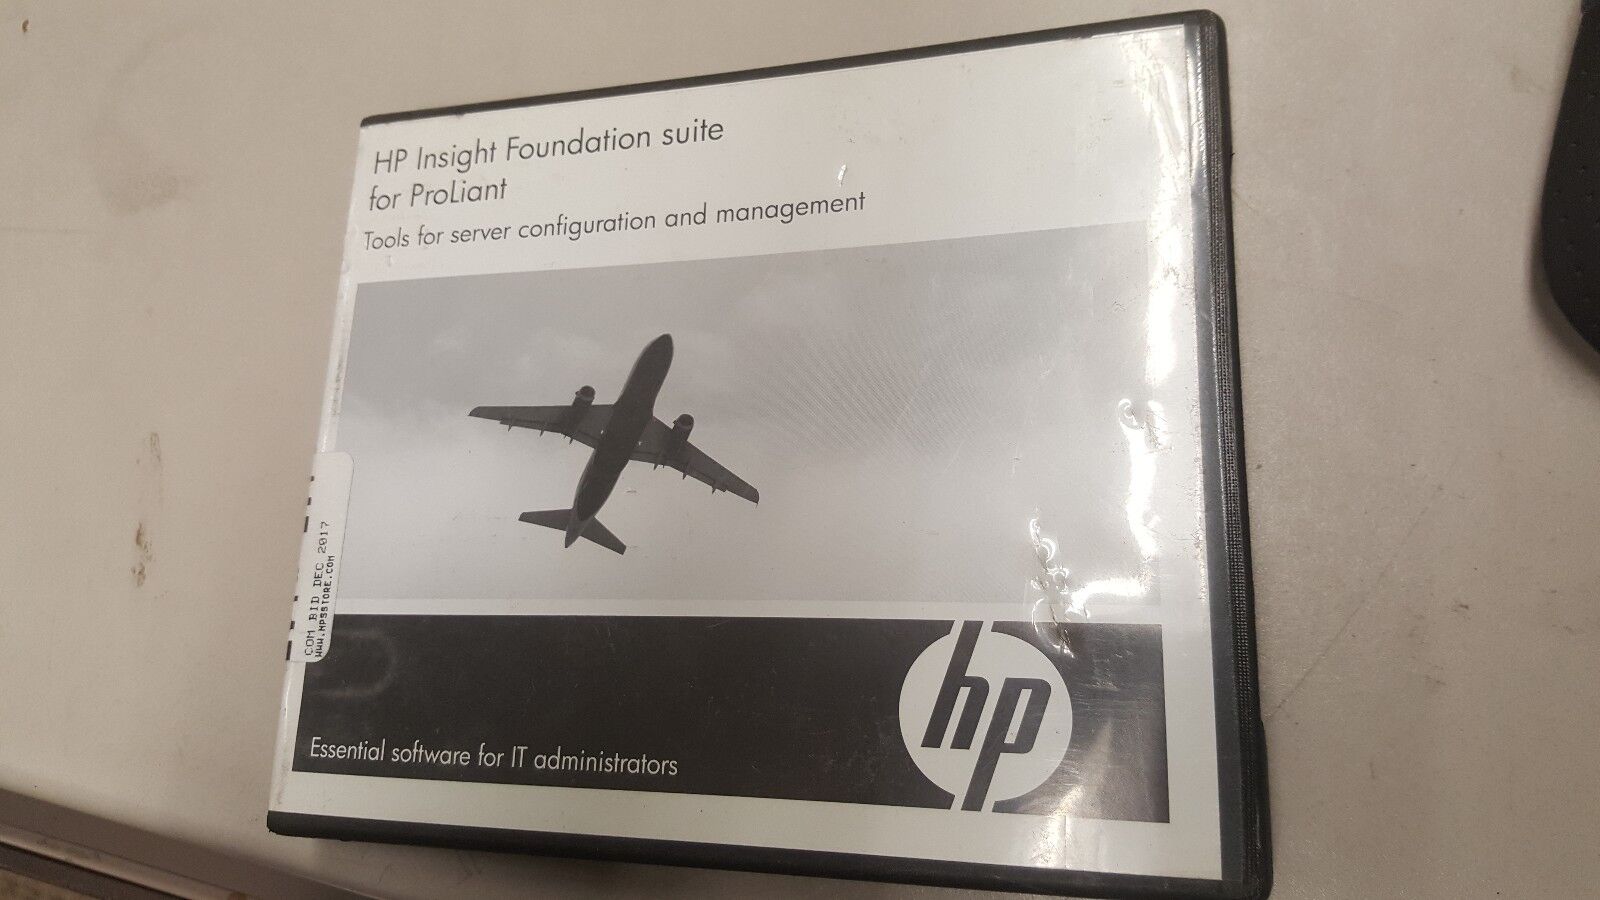 HP Insight Foundation suite for ProLiant 301972-a20 kit Great shape authentic